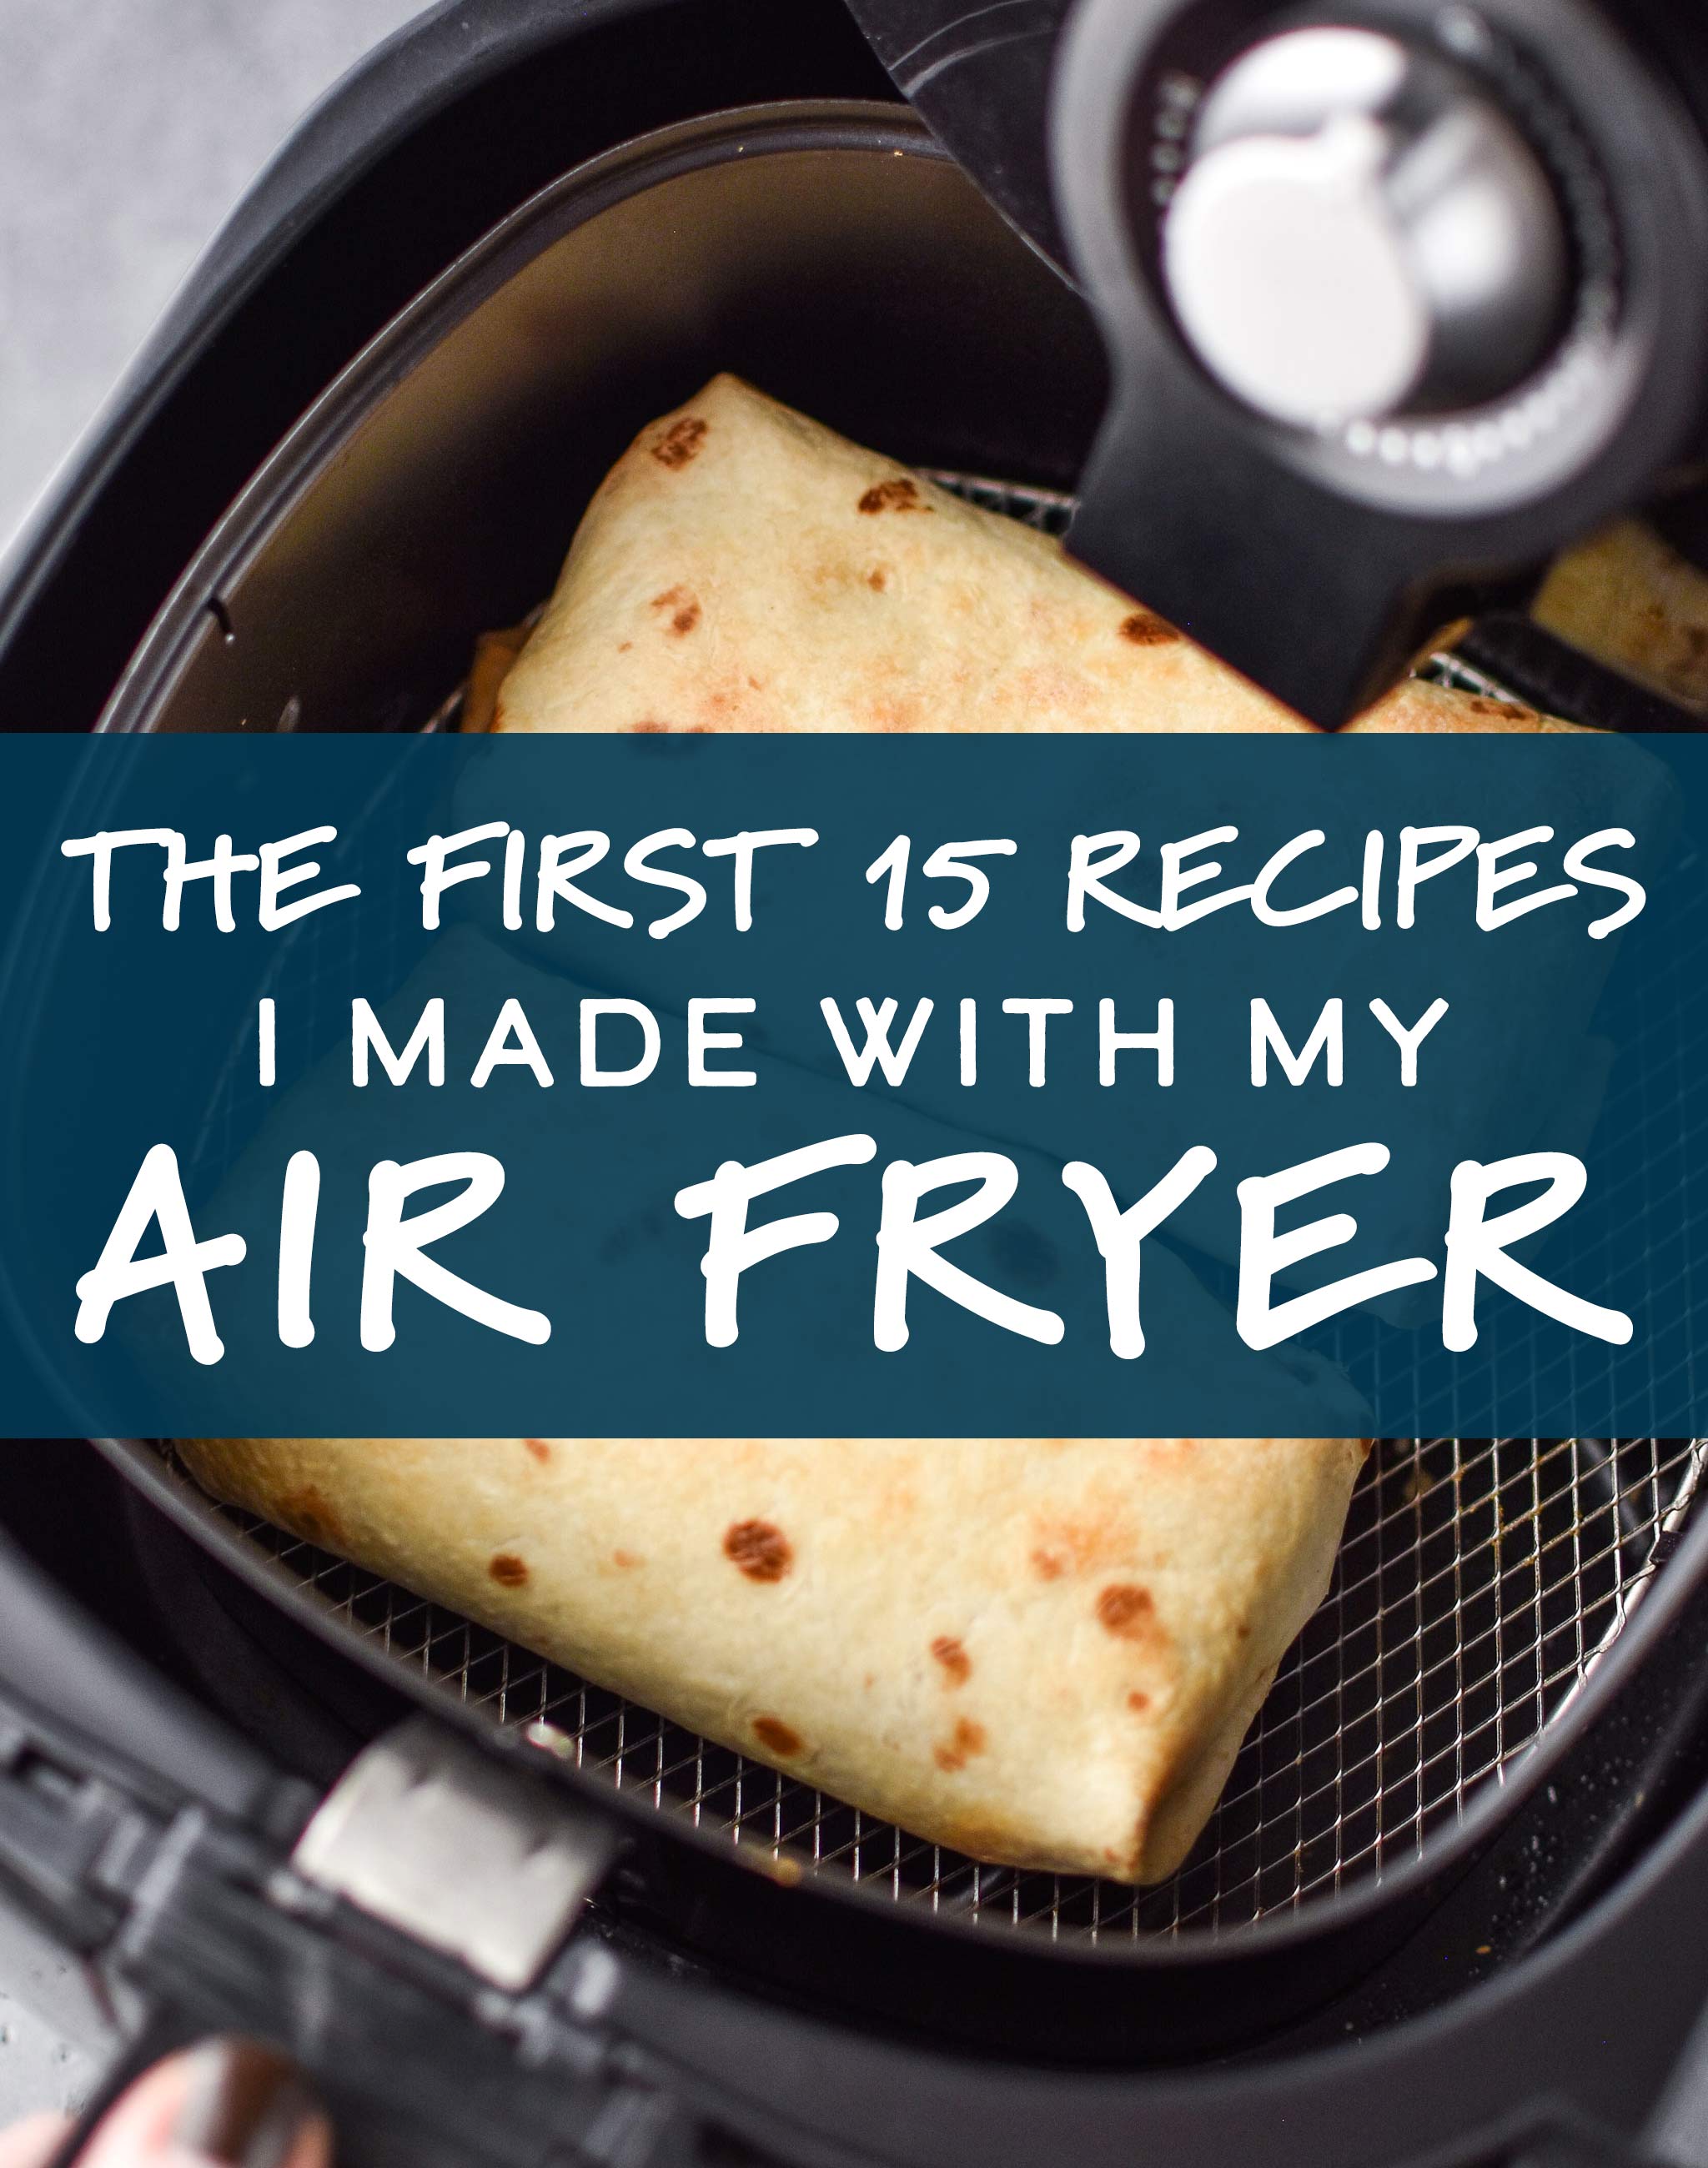 The First 15 Recipes I Made With My Air Fryer - Project Meal Plan